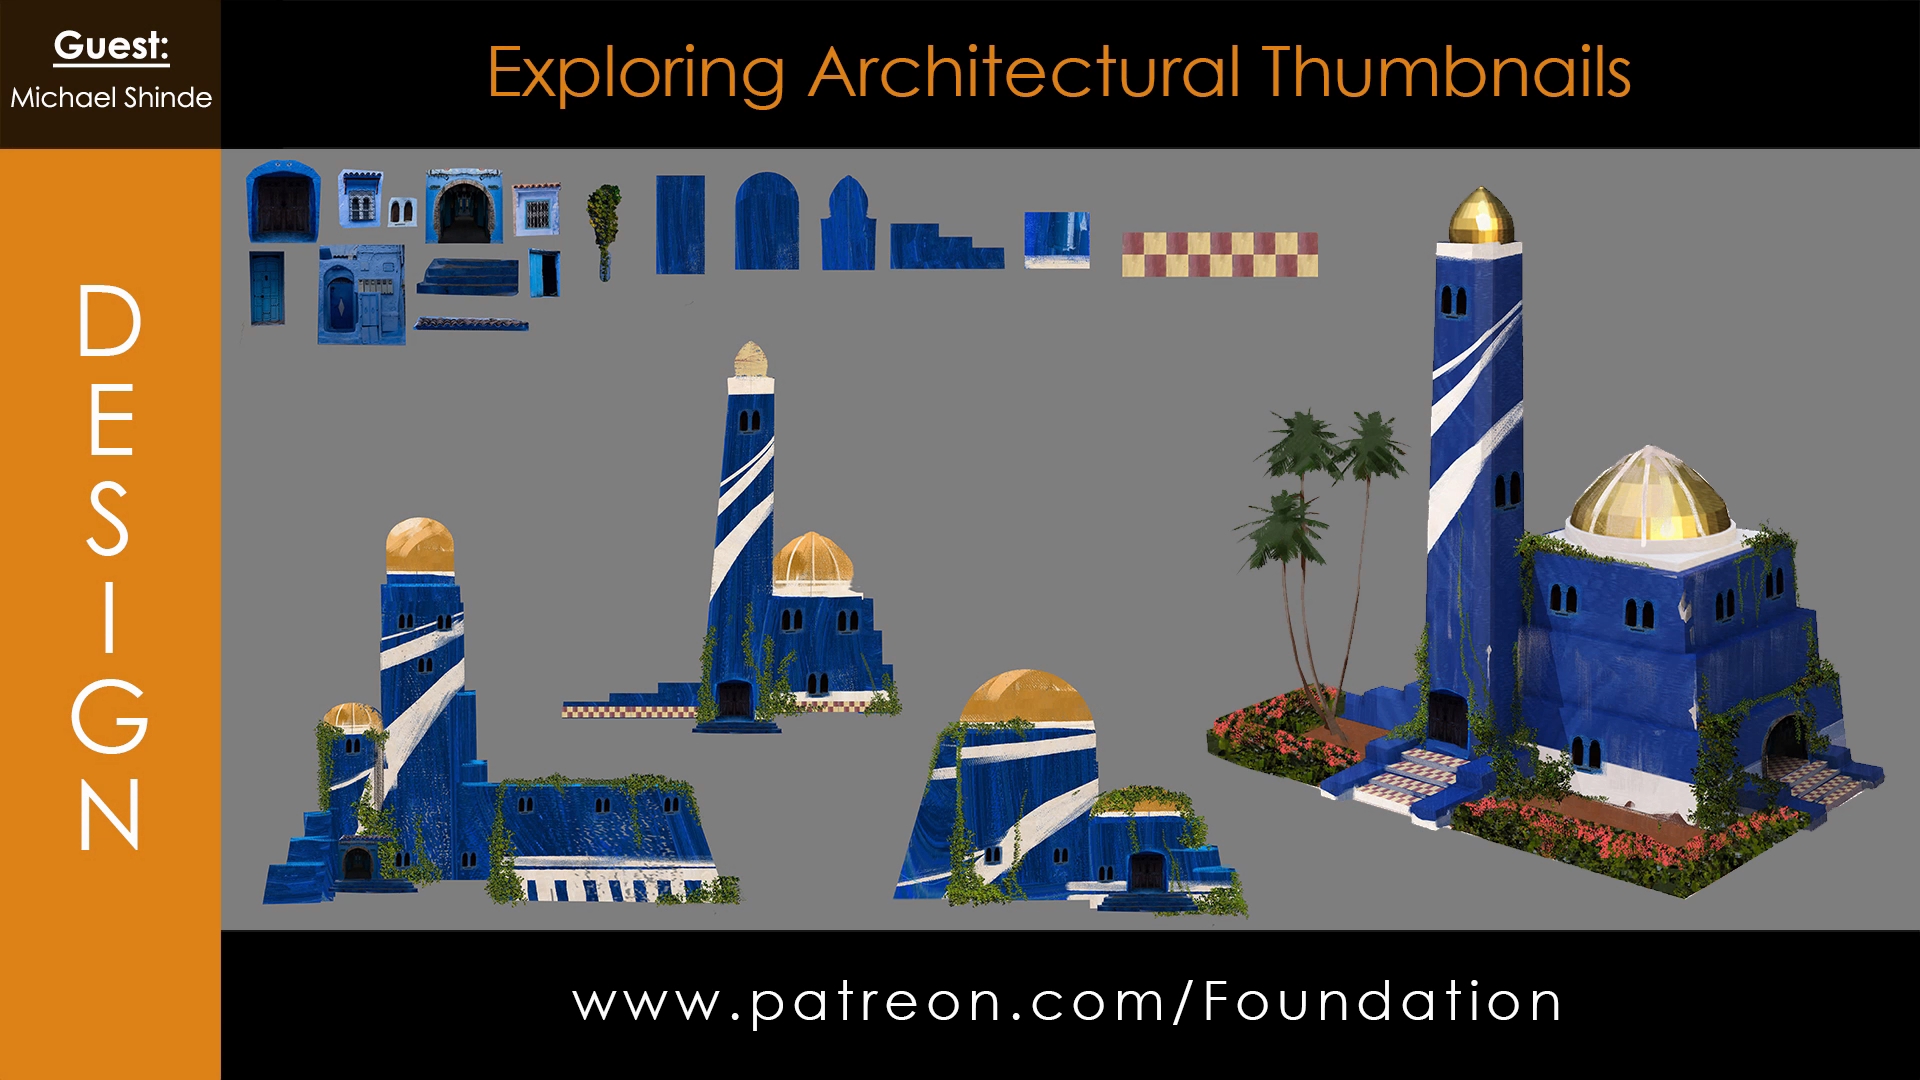 Exploring Architectural Thumbnails with Michael Shinde